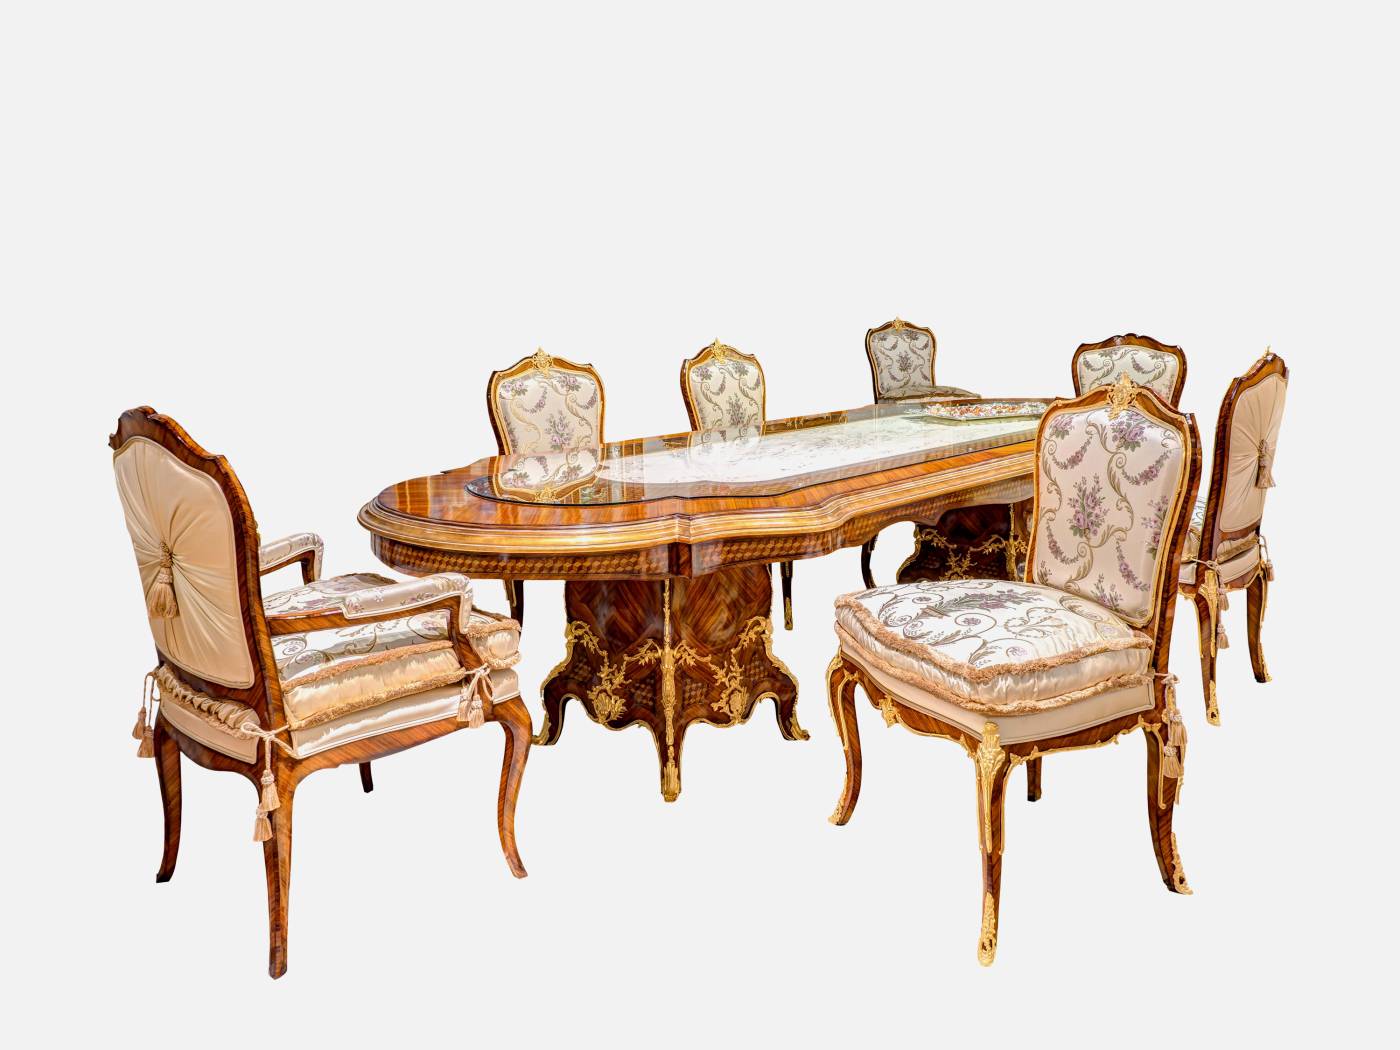 ART. 1094-5 – The elegance of luxury classic Tables made in Italy by C.G. Capelletti.